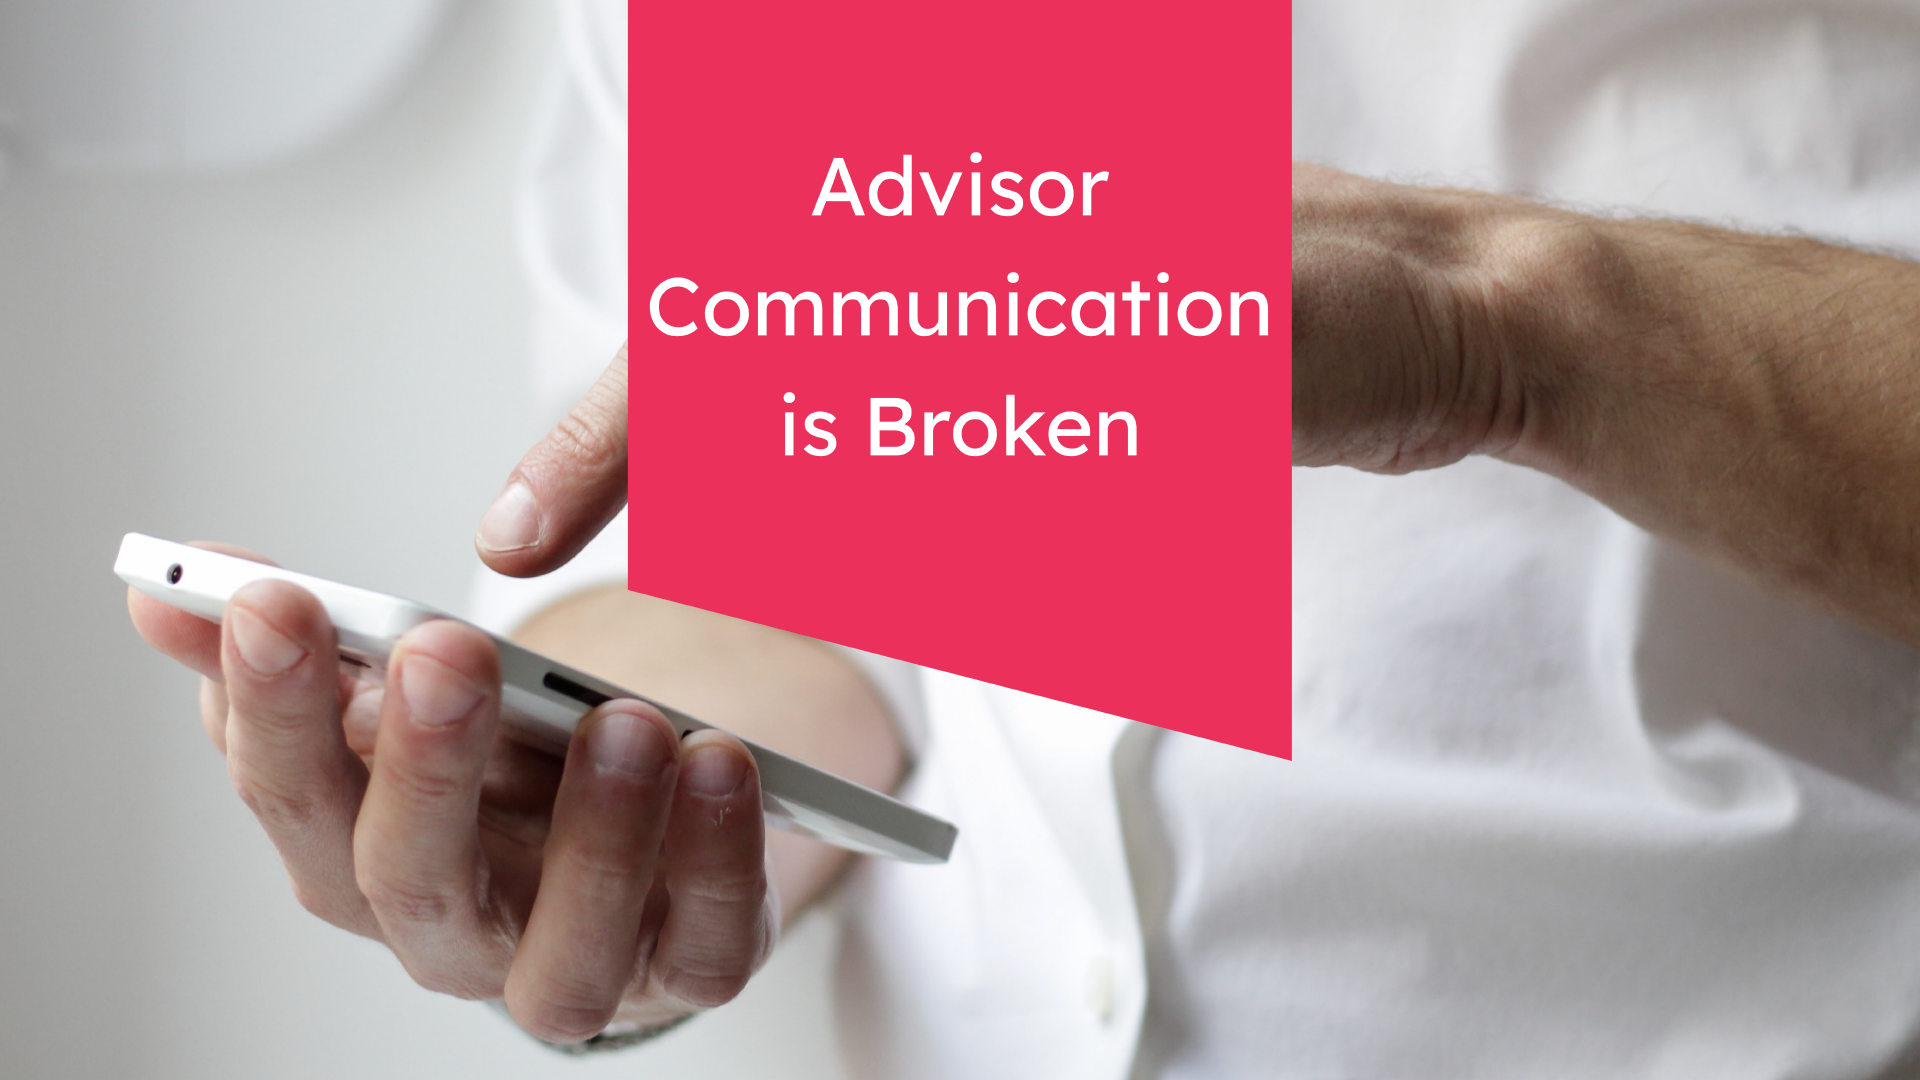 Why Financial Advisor Communication is Broken (And What You Can Do to Fix It)